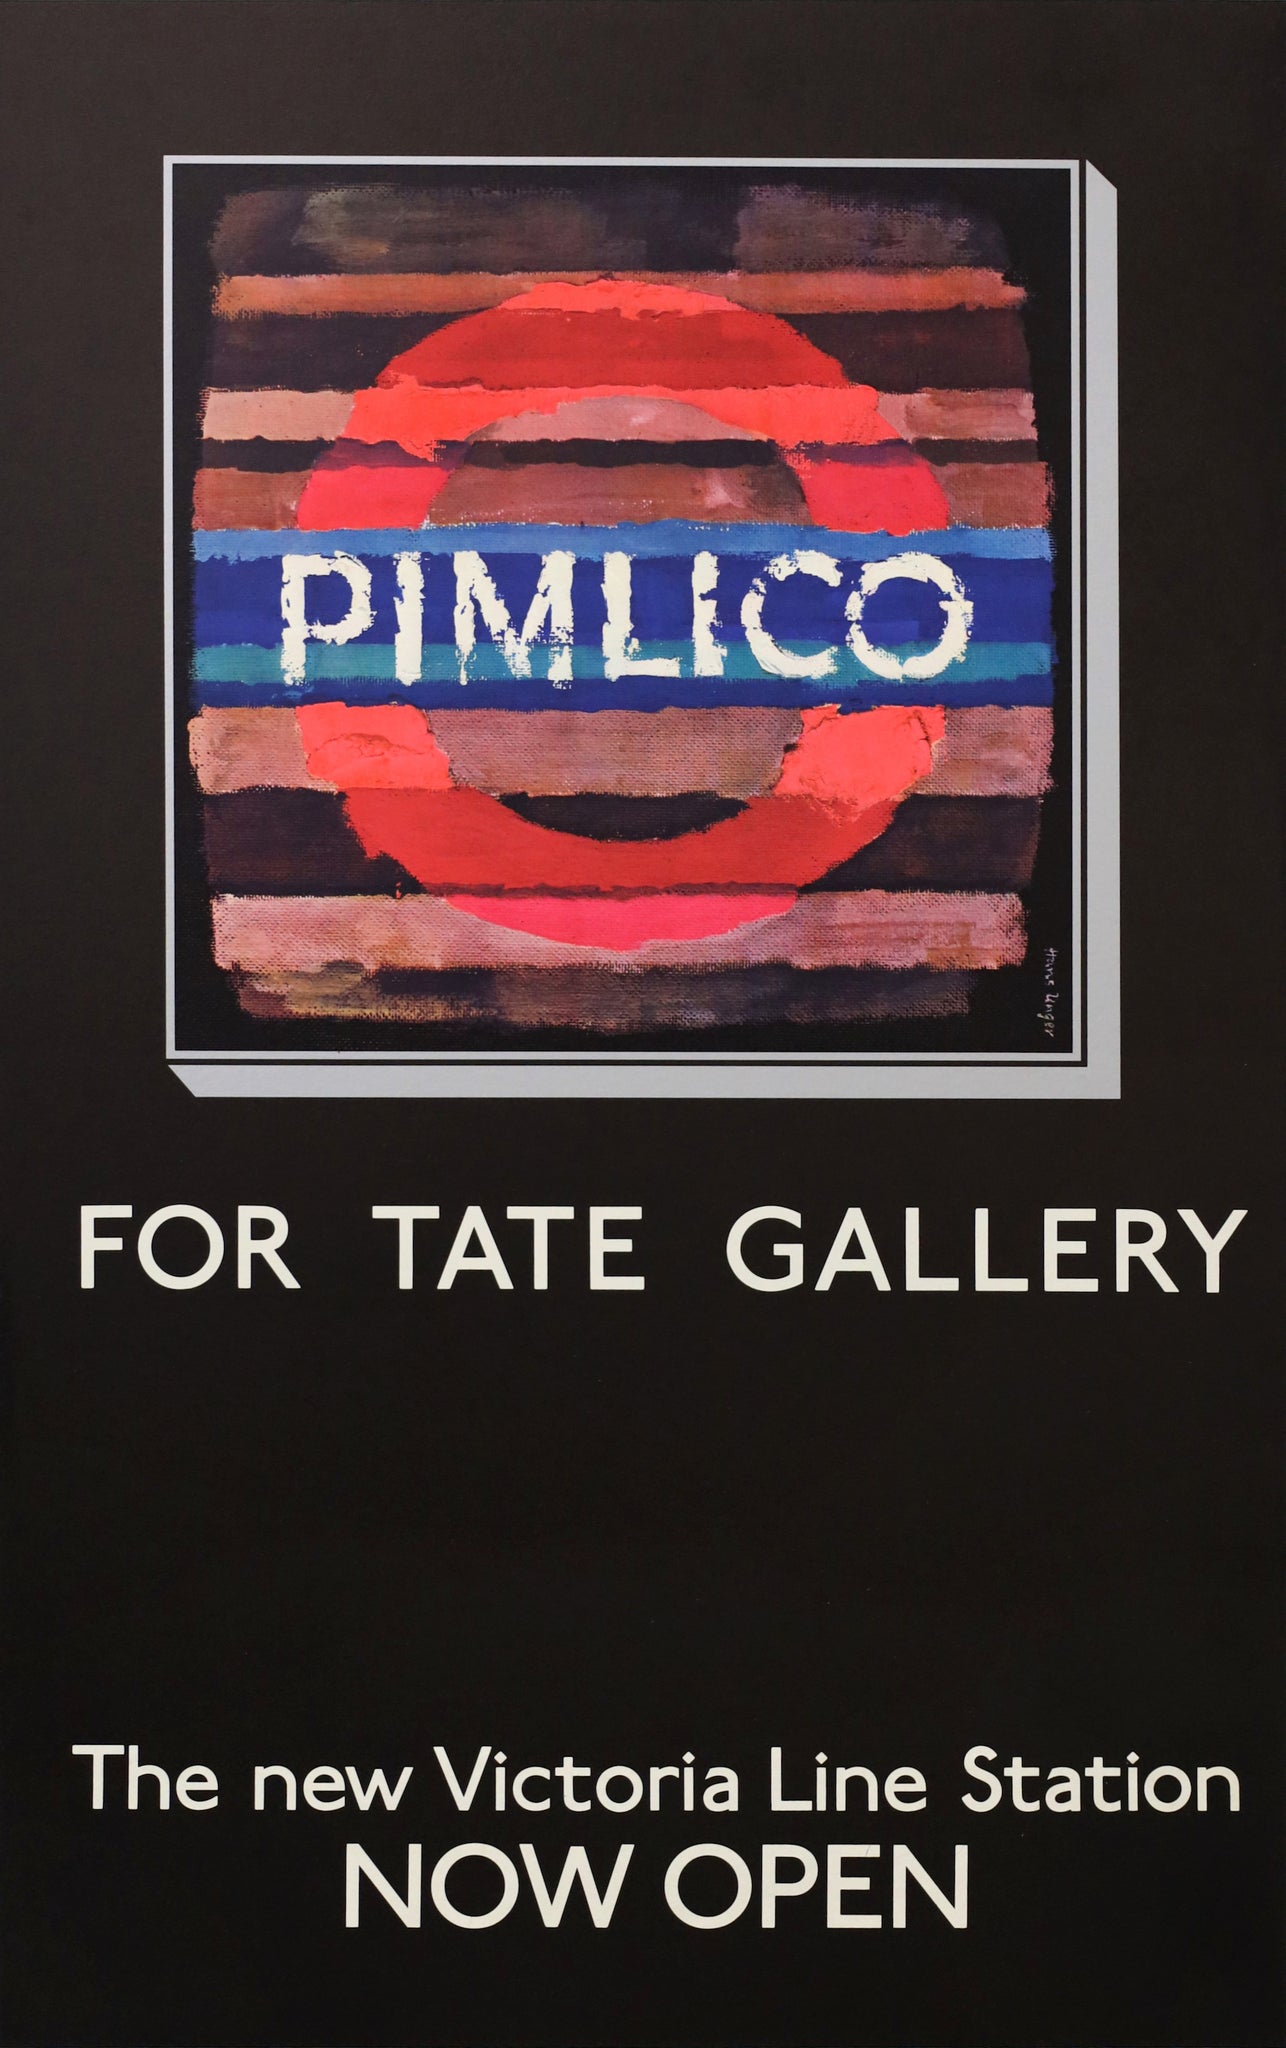 London Transport Poster - Pimlico for the Tate Gallery